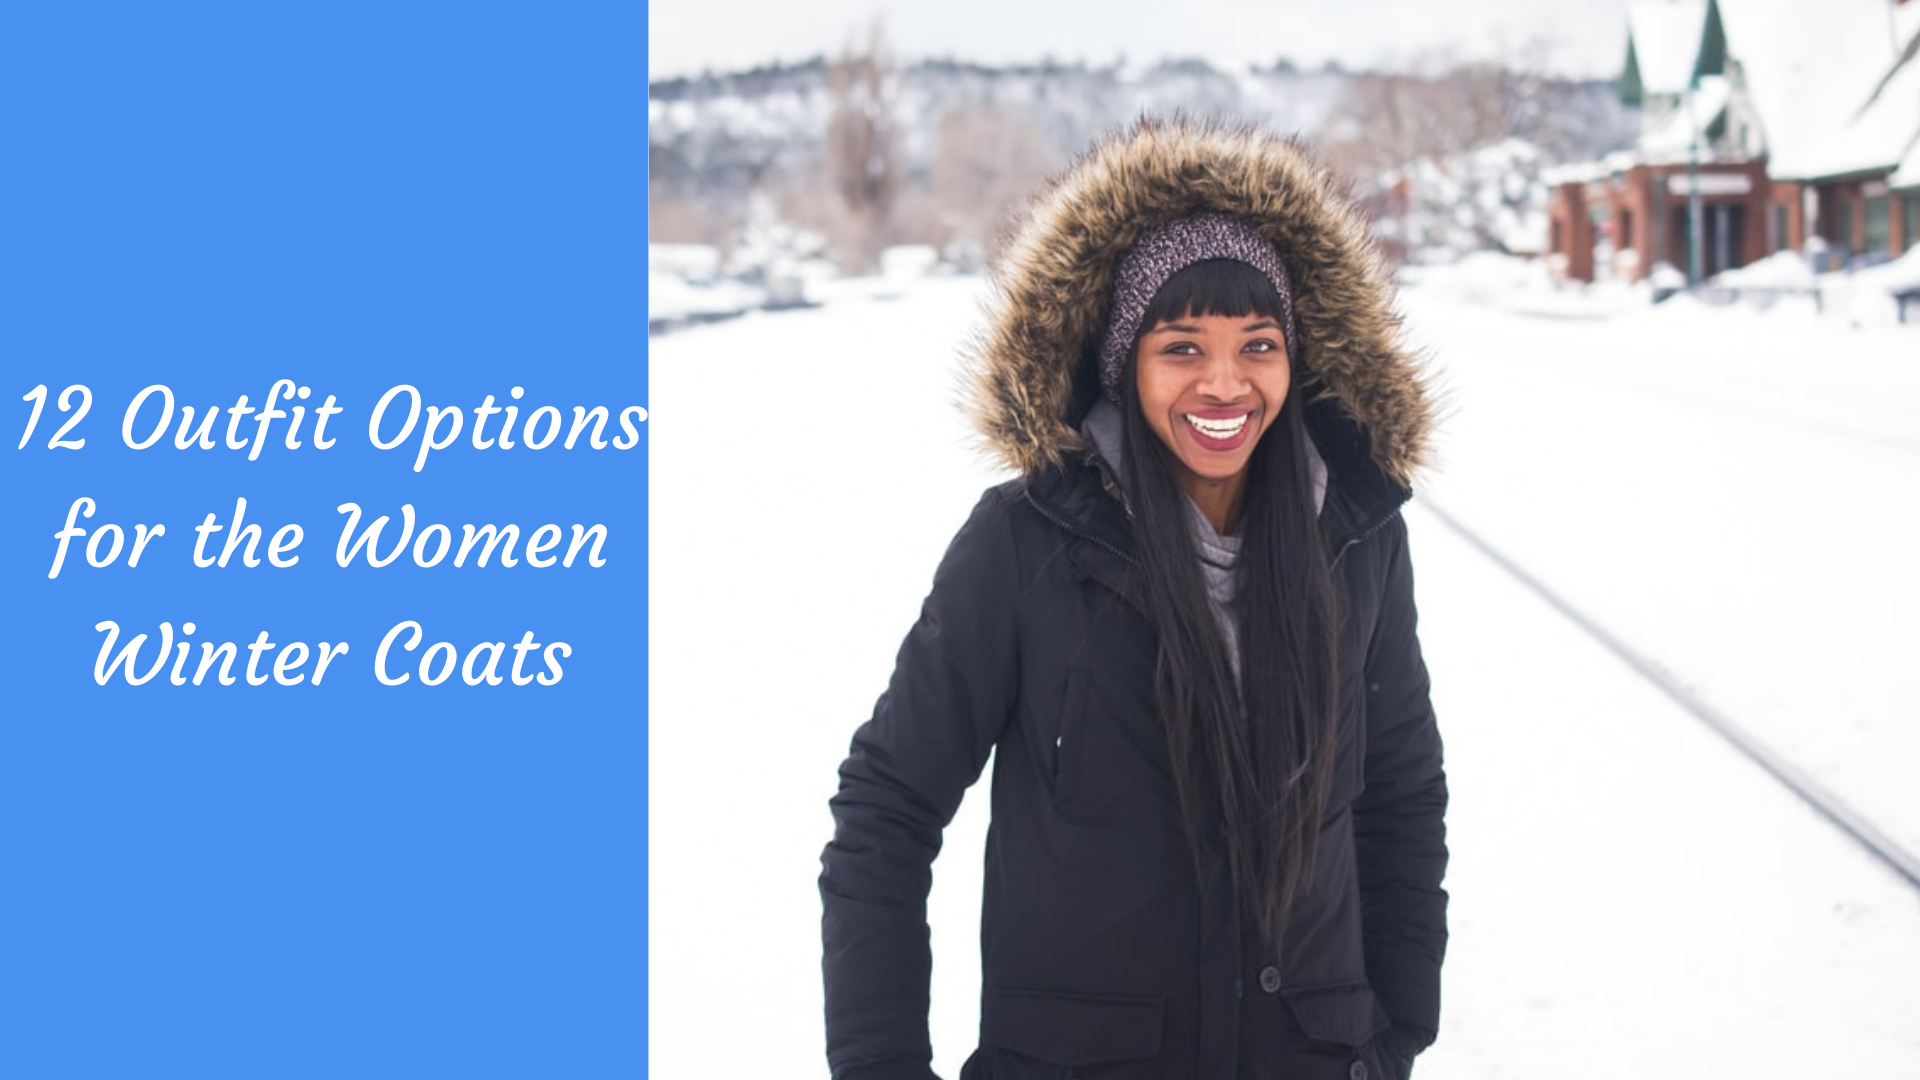 12 Outfit Options for the Women Winter Coats - The Kosha Journal